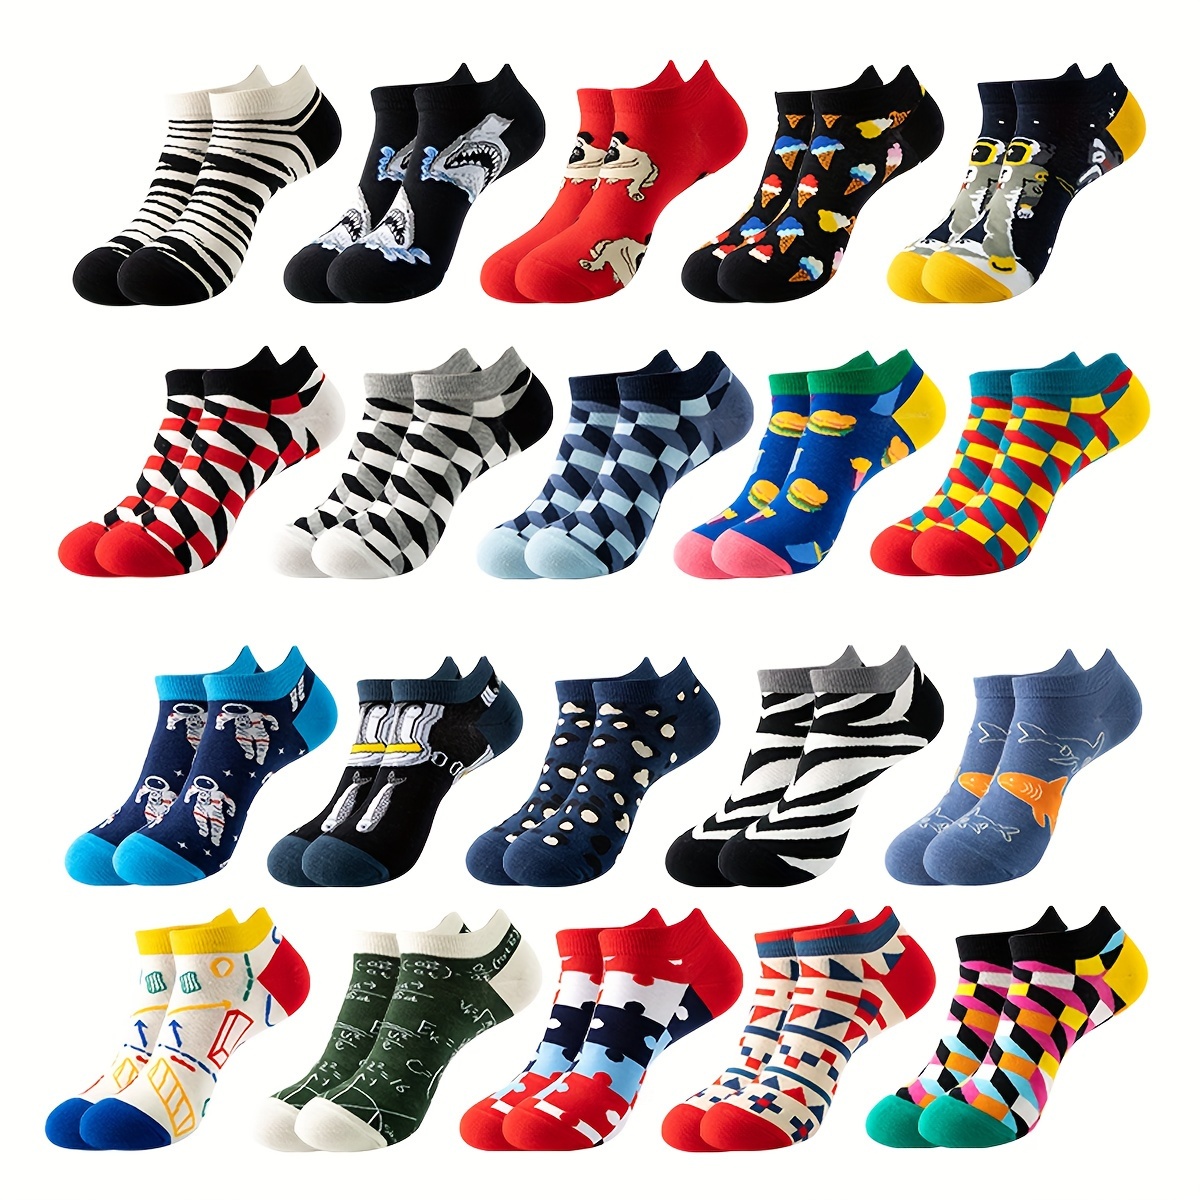 

8 Or 10 Pairs Of Men's Cotton Blend Fashion Fun Pattern Low-cut Socks, Comfy & Breathable Elastic Socks, For Gifts, Parties And Daily Wearing